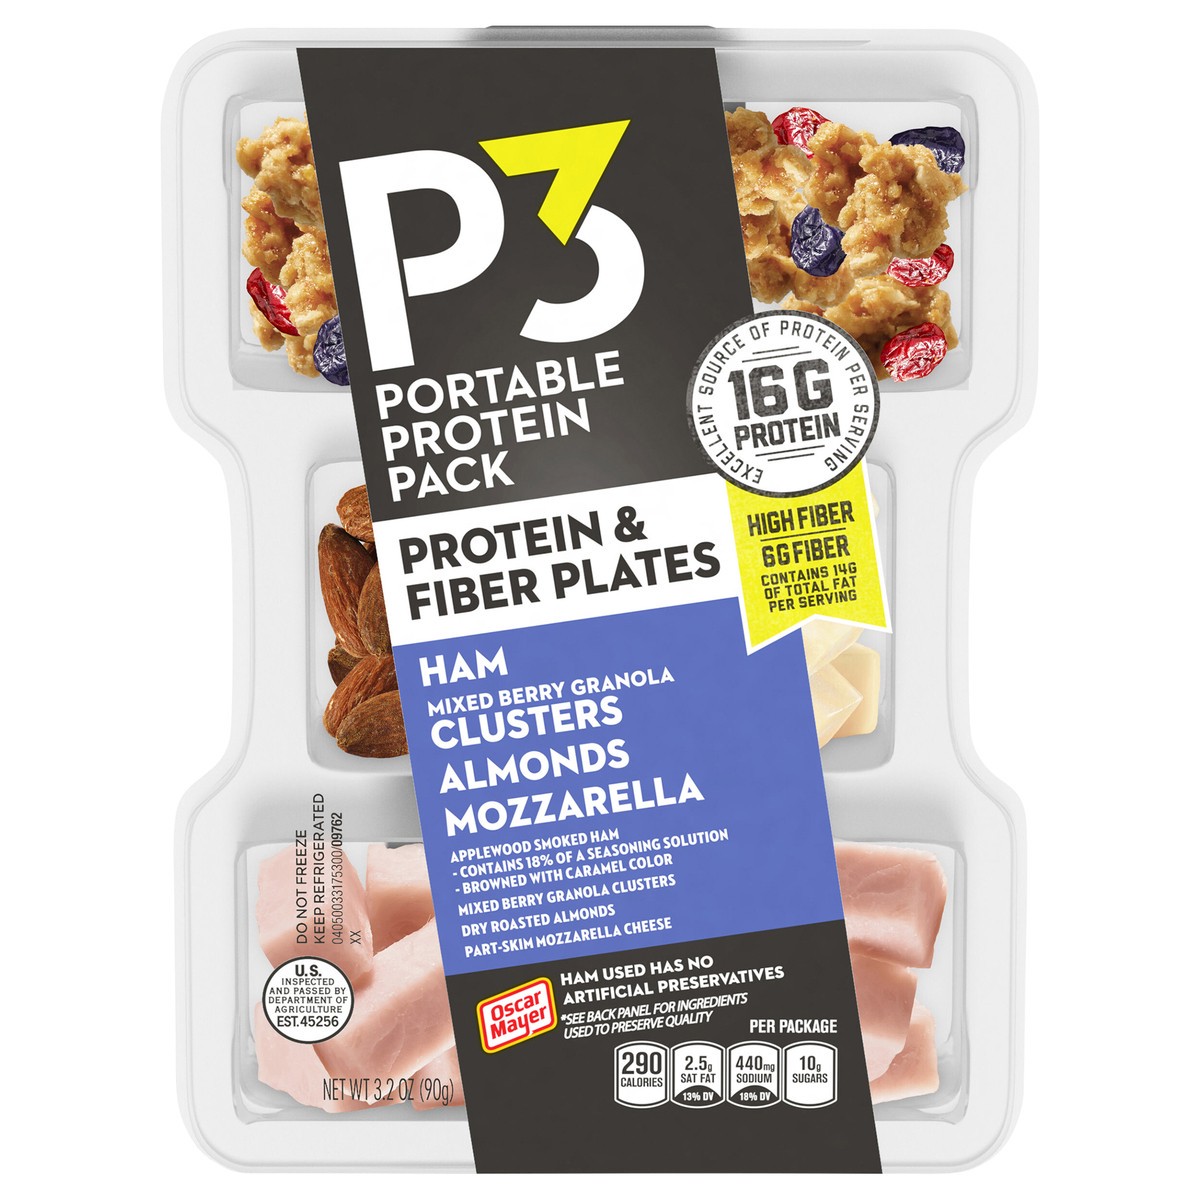 slide 6 of 13, P3 Portable Protein Snack Pack & Fiber Plate with Ham, Mixed Berry Granola Clusters, Almonds & Mozzarella Cheese, 3.2 oz Tray, 3.2 oz